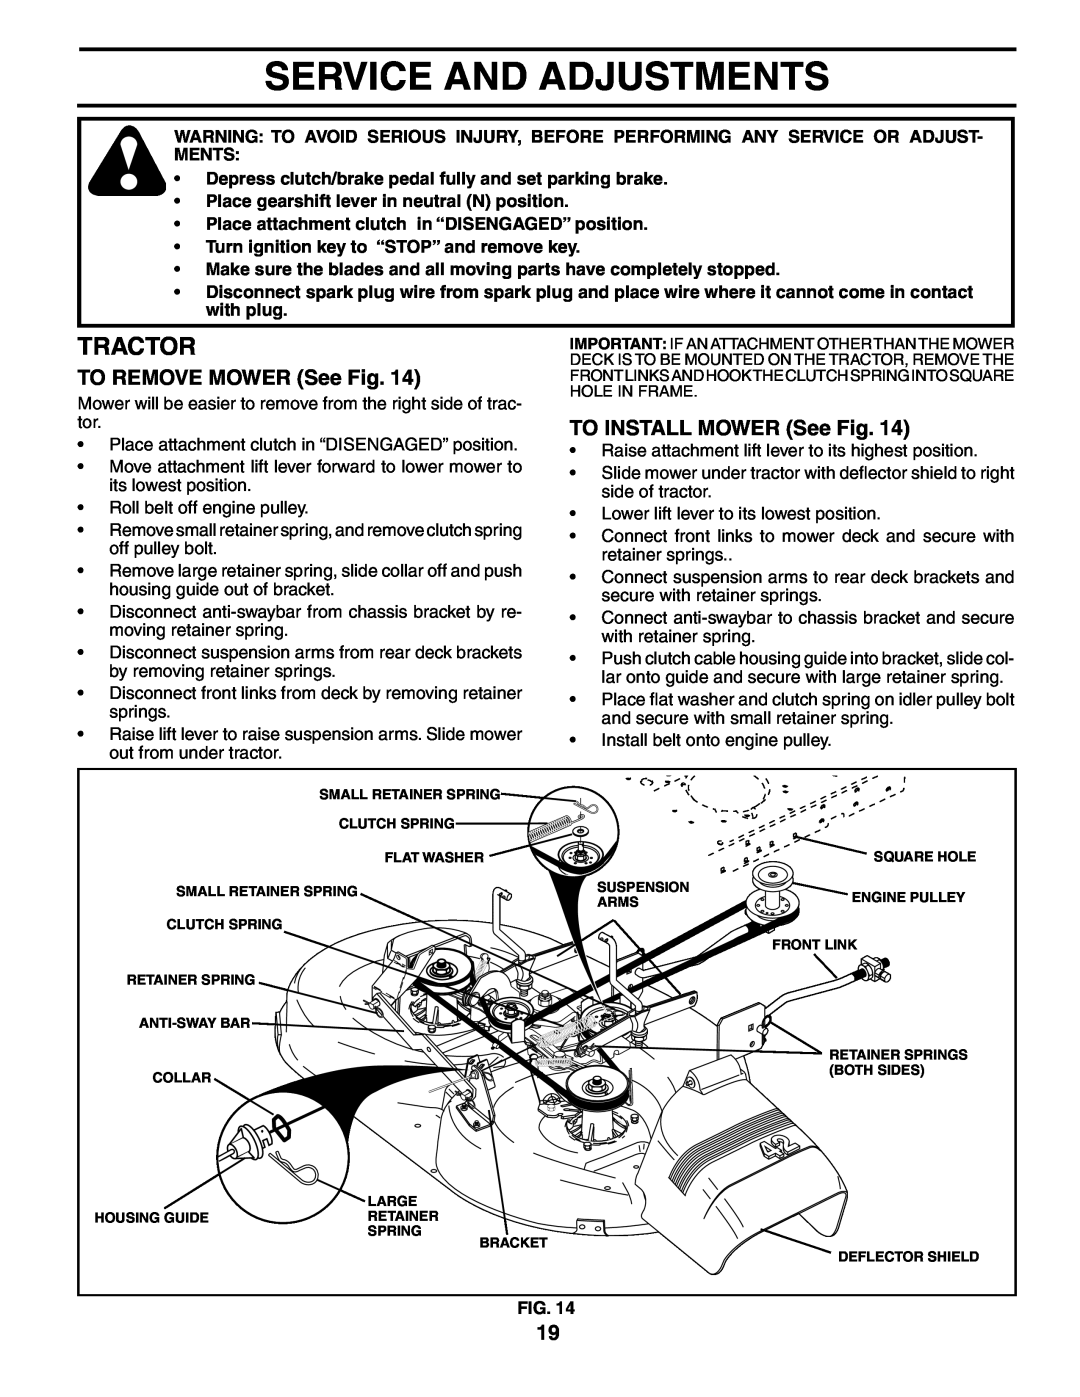 Husqvarna LT16542 owner manual Service And Adjustments, TO REMOVE MOWER See Fig, TO INSTALL MOWER See Fig, Tractor 